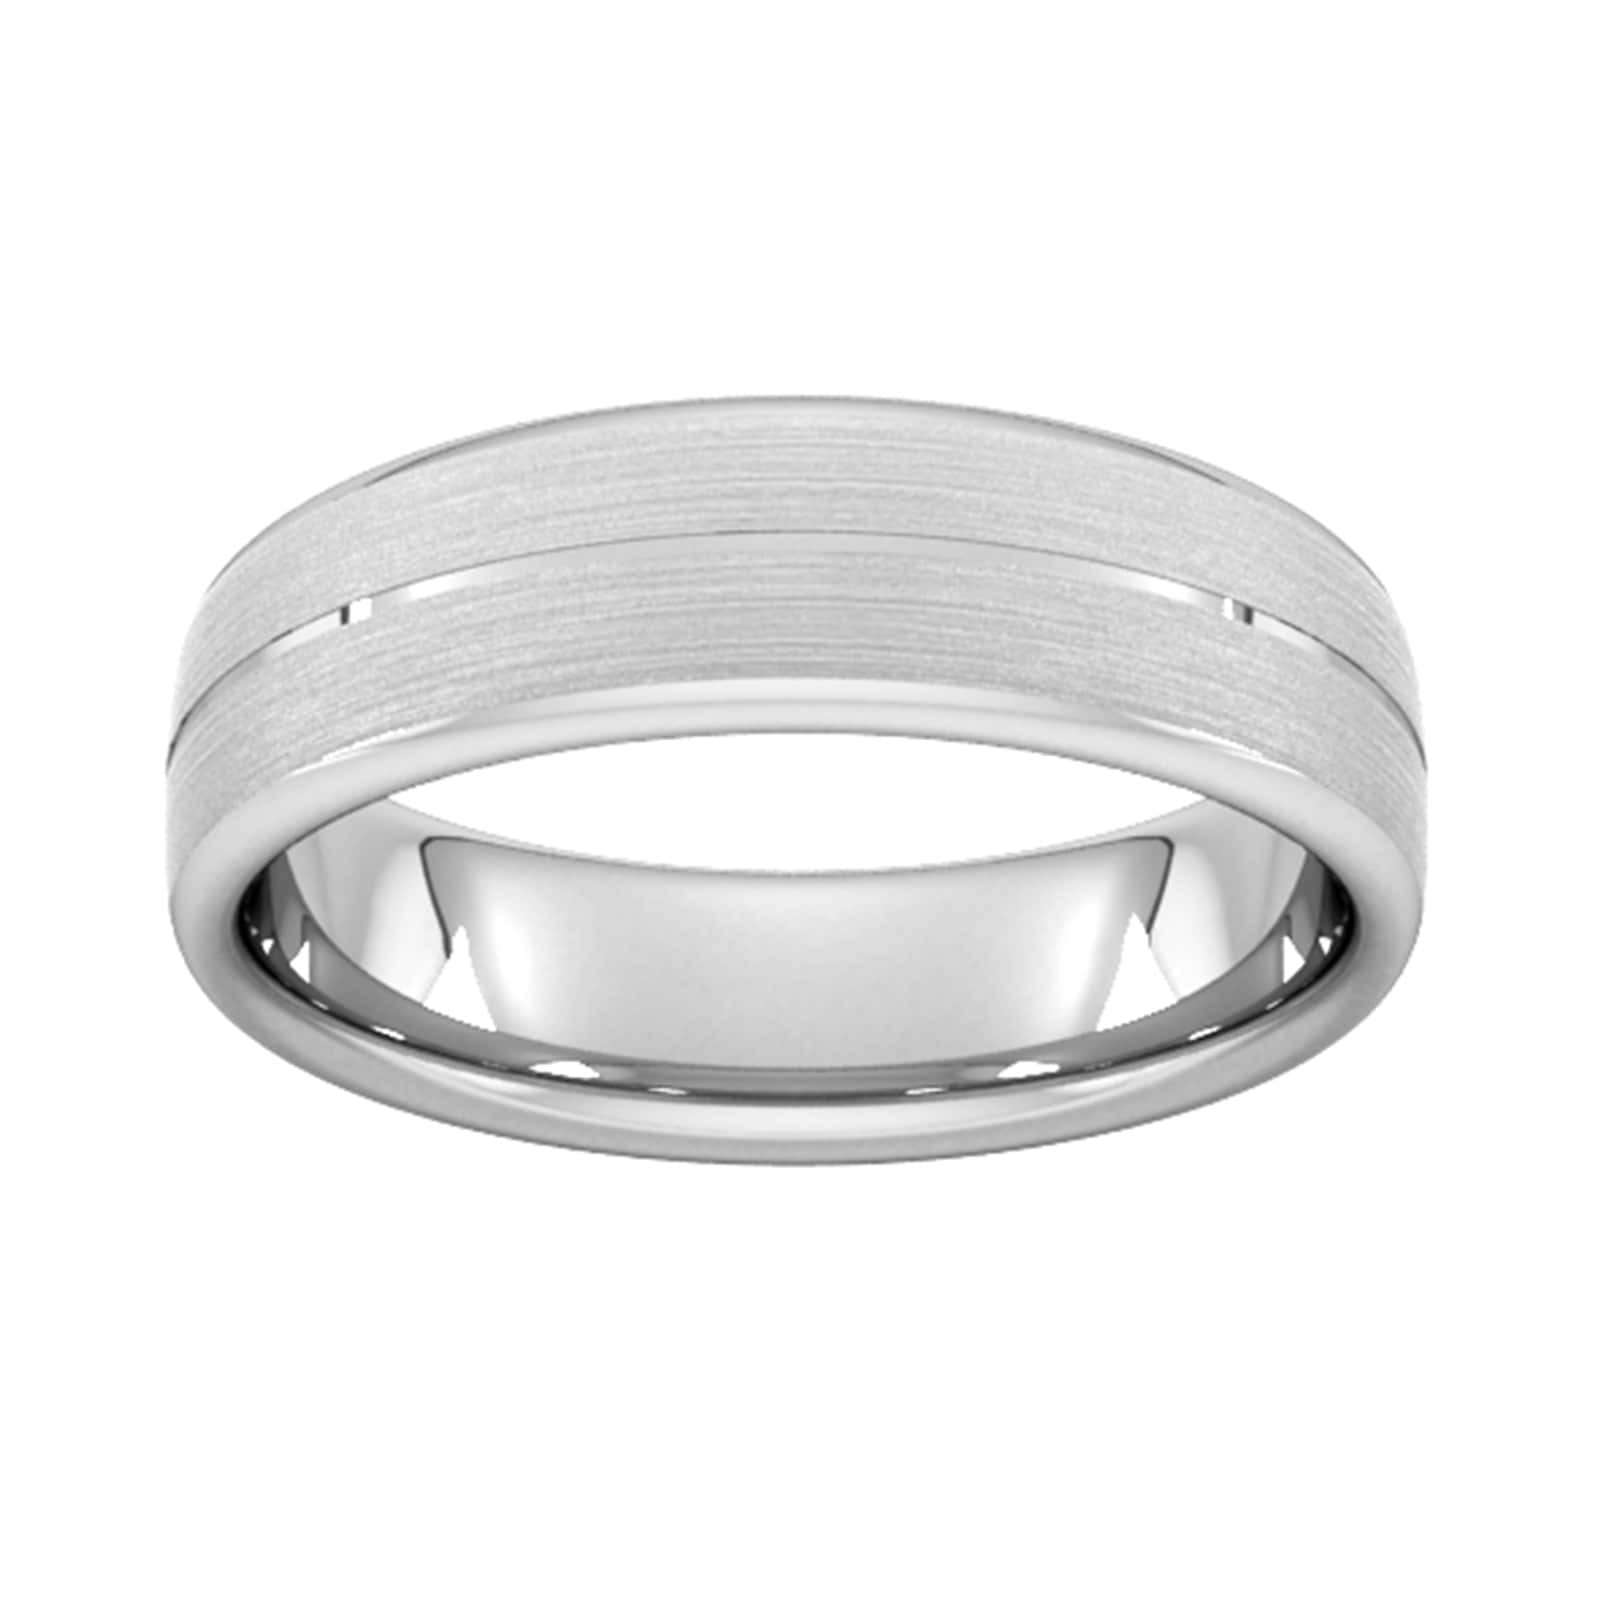 6mm Traditional Court Standard Centre Groove With Chamfered Edge Wedding Ring In 18 Carat White Gold - Ring Size K